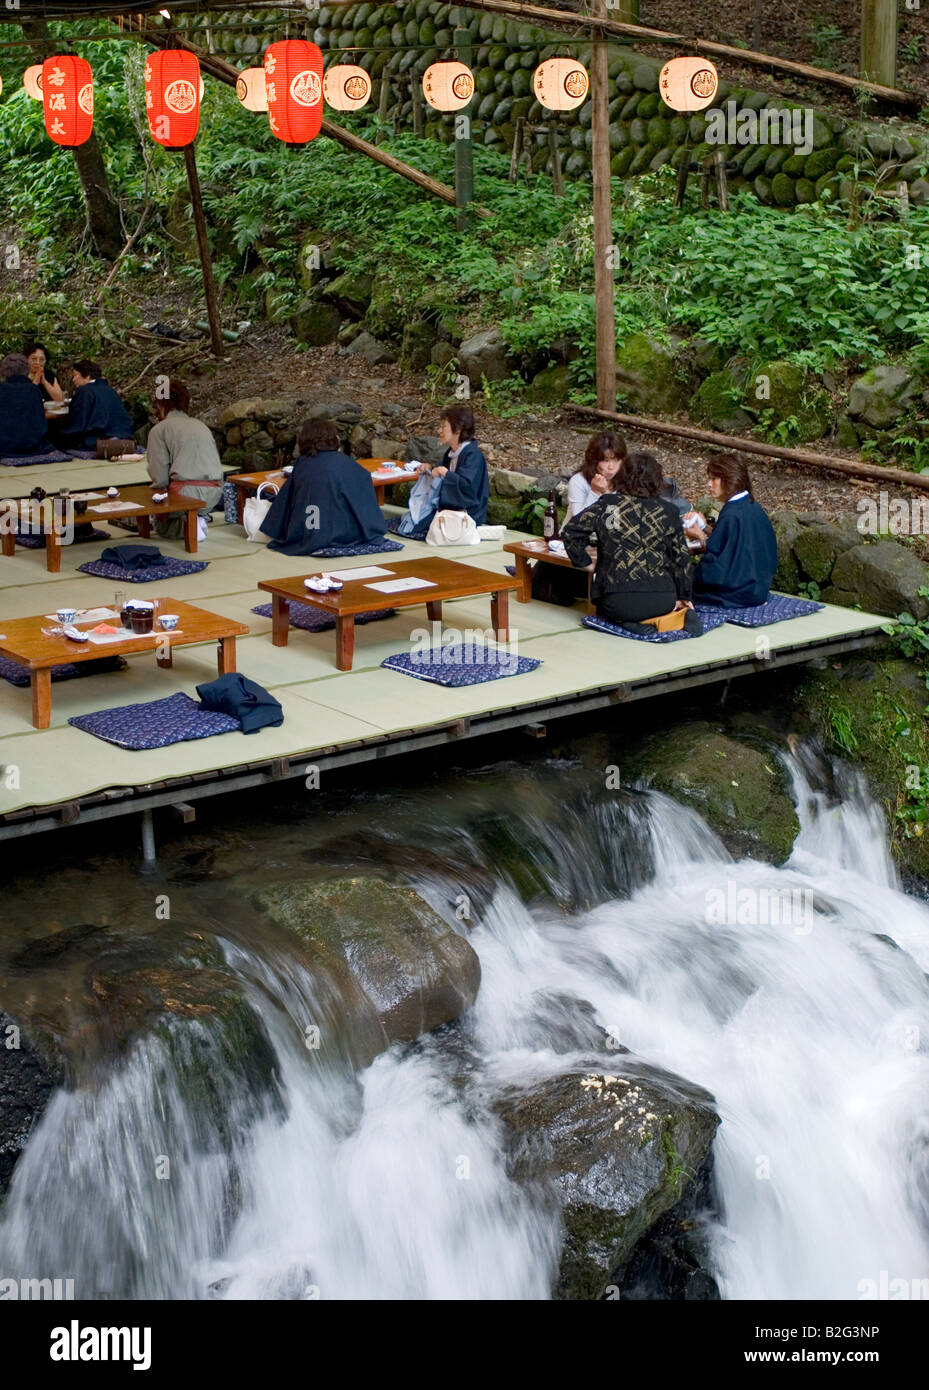 Restaurant patrons have lunch above the rushing water of the Kibune River while enjoying cool breezes during hot summer months Stock Photo